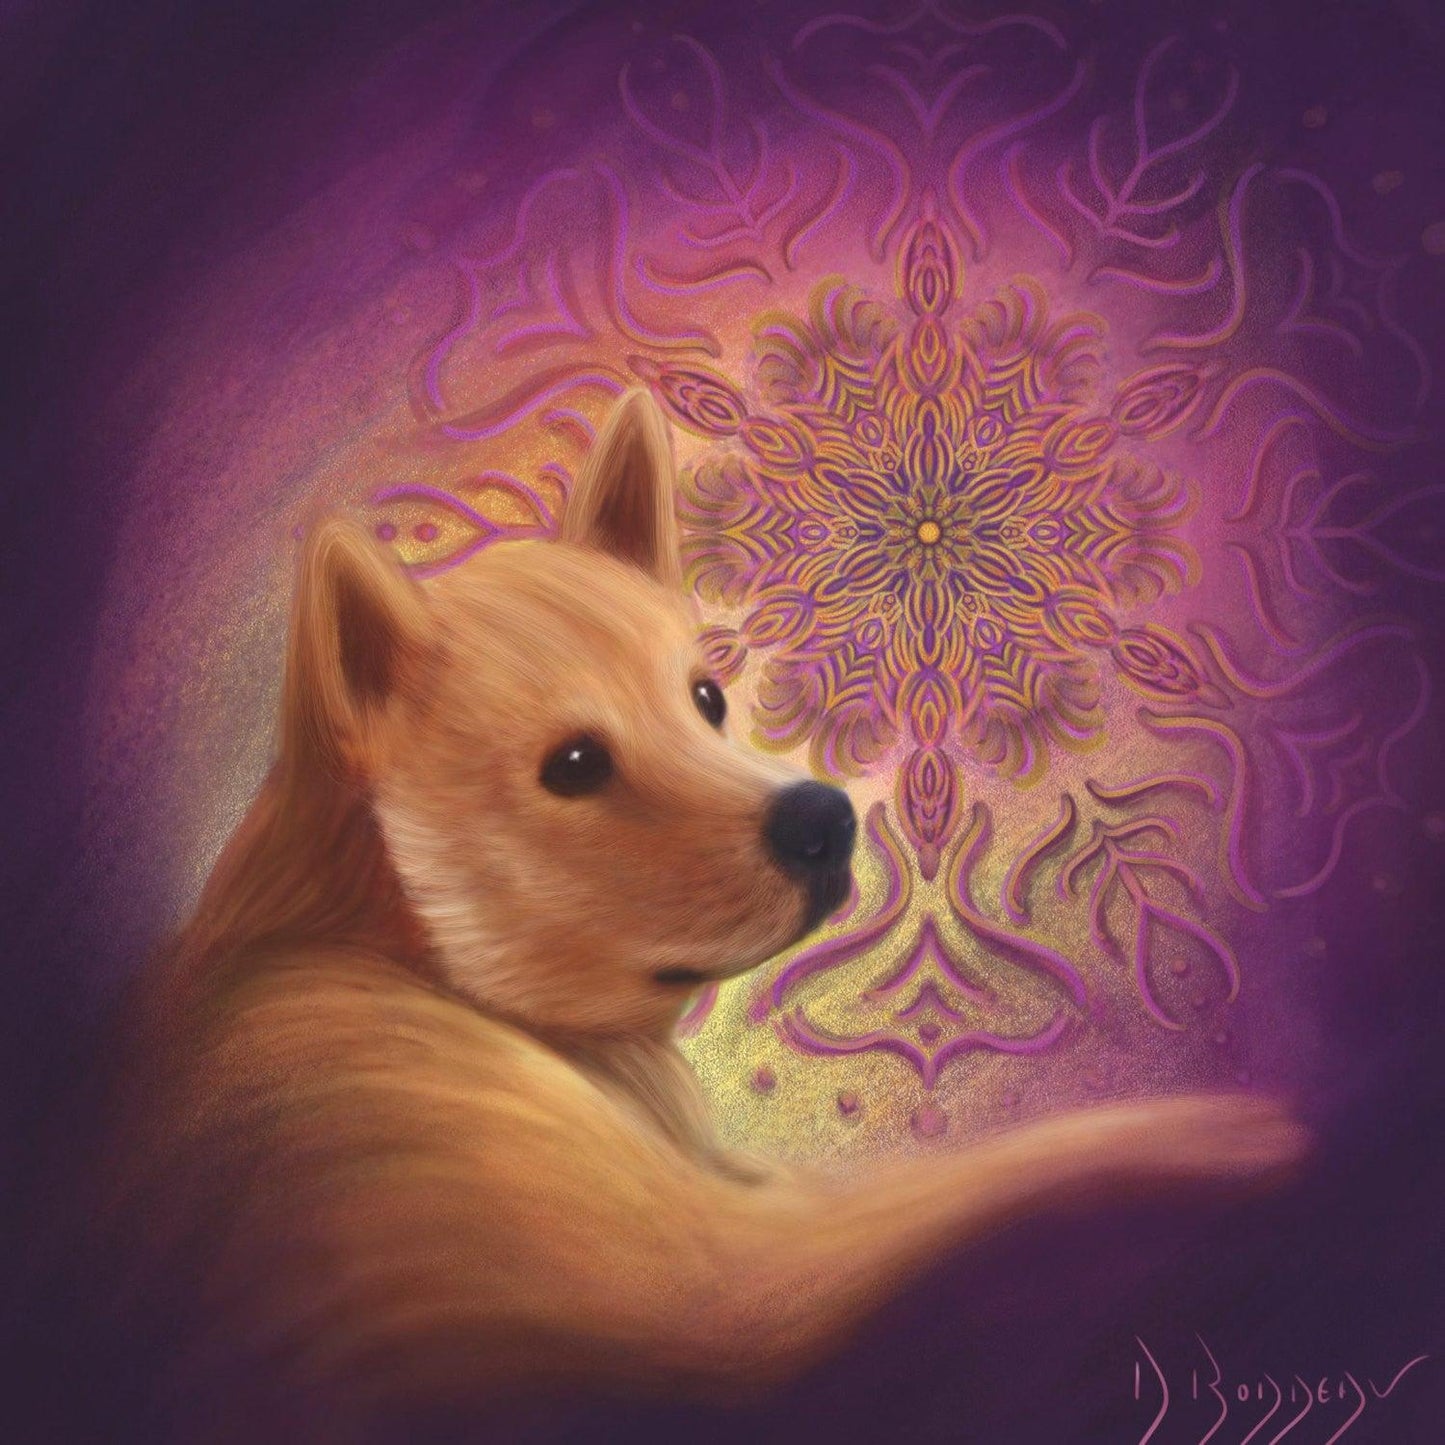 Dog Artwork - Visionary Art - Digital Painting - Psychedelic Print -  Trippy Painting - GratefullyDyed